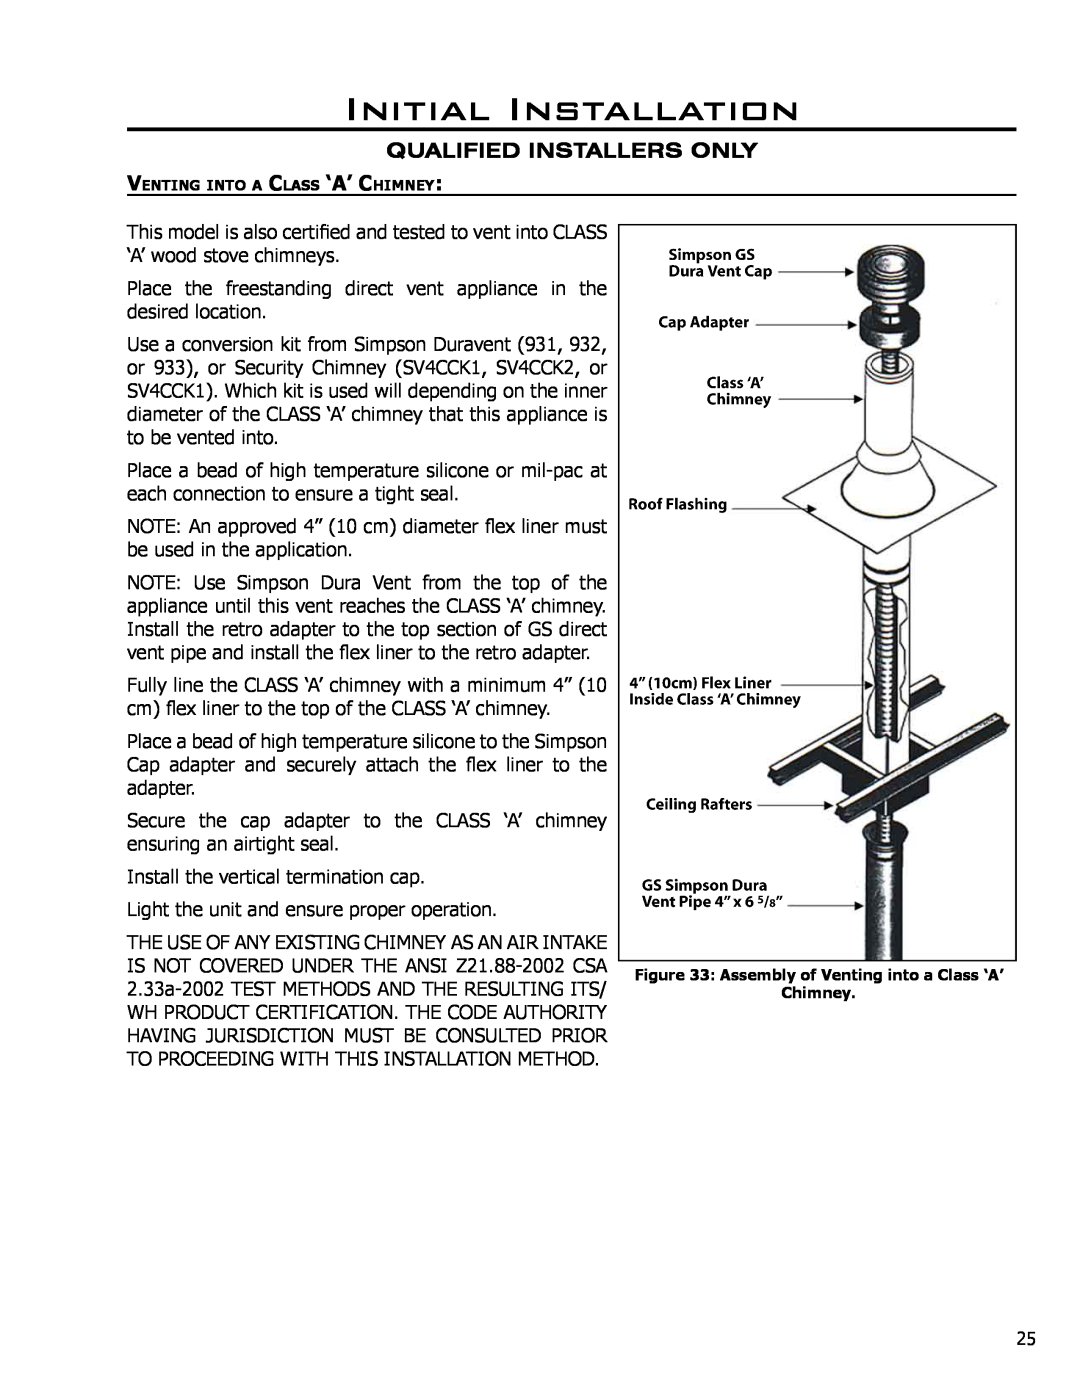 Enviro C-10794 owner manual Initial Installation, Qualified Installers Only, Install the vertical termination cap 